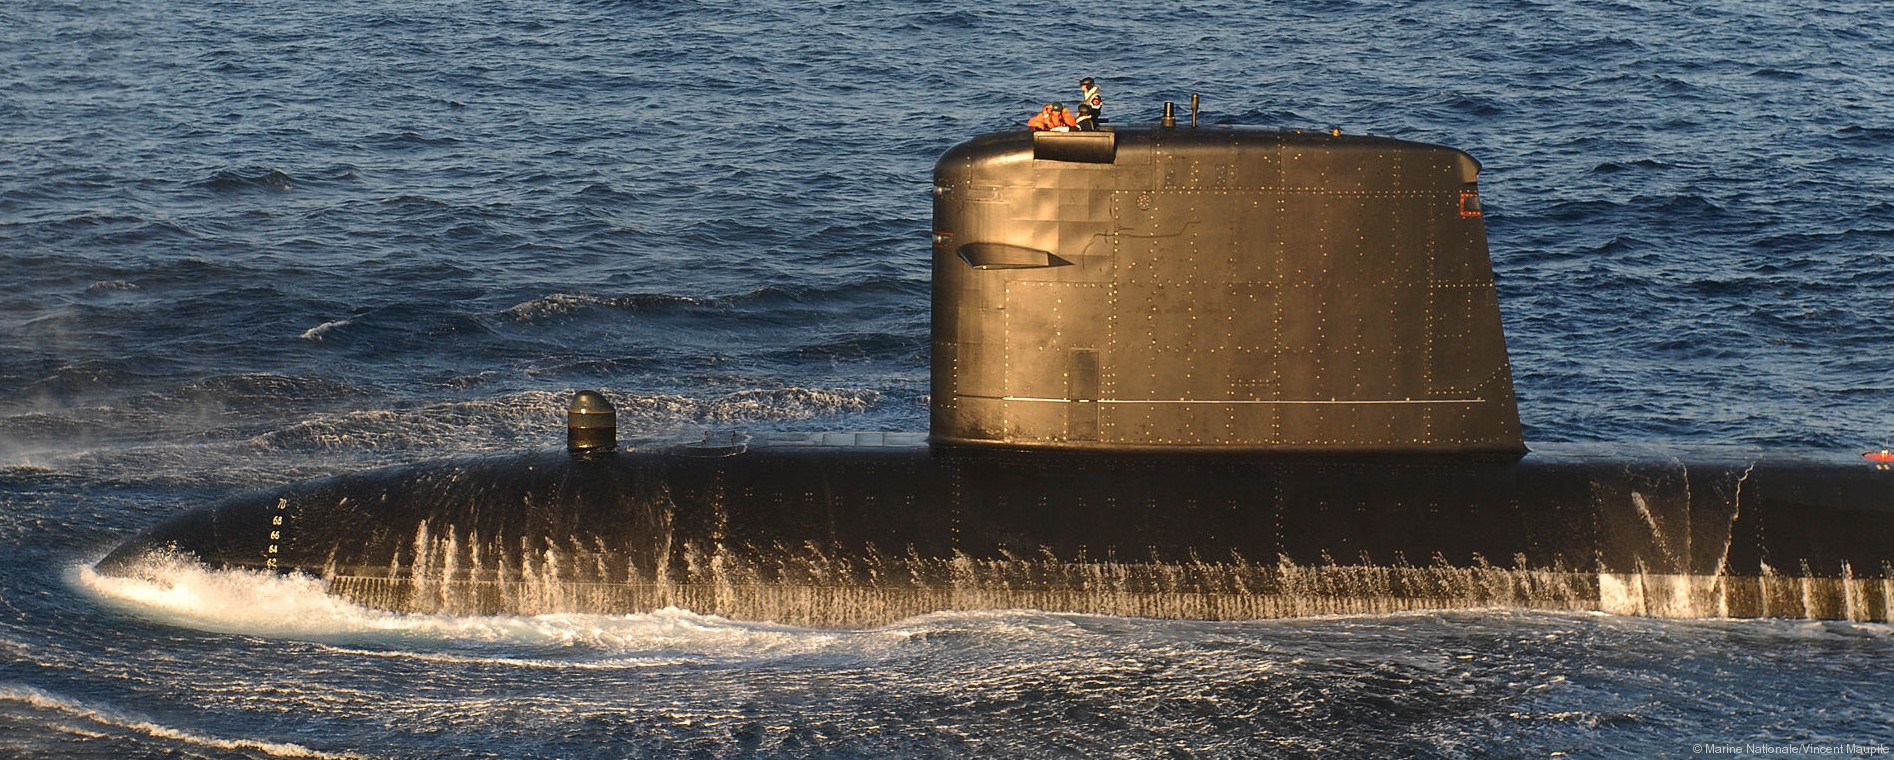 s-605 amethyste rubis class attack submarine ssn french navy marine nationale sna 03